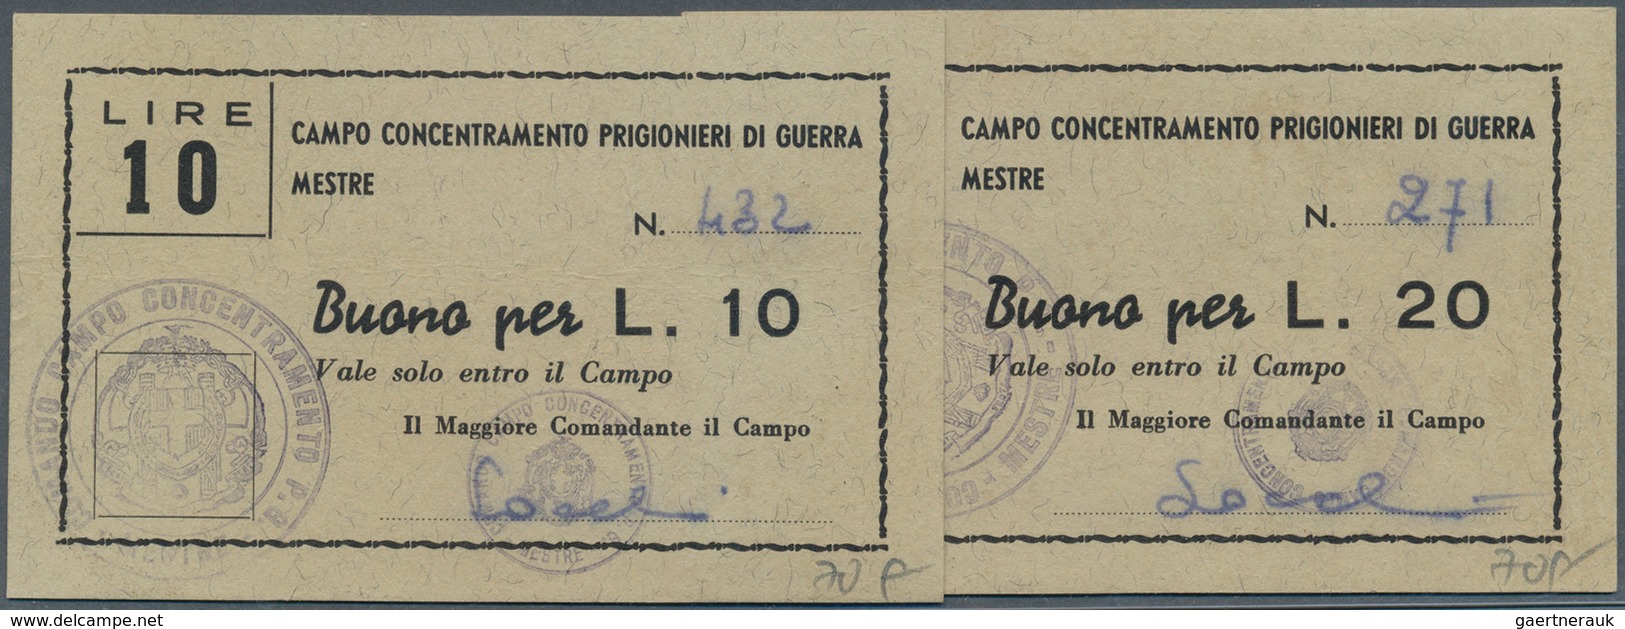 Italy / Italien: set of 28 P.O.W. notes Italy containing the following Campell numbers: 6159 (2x in